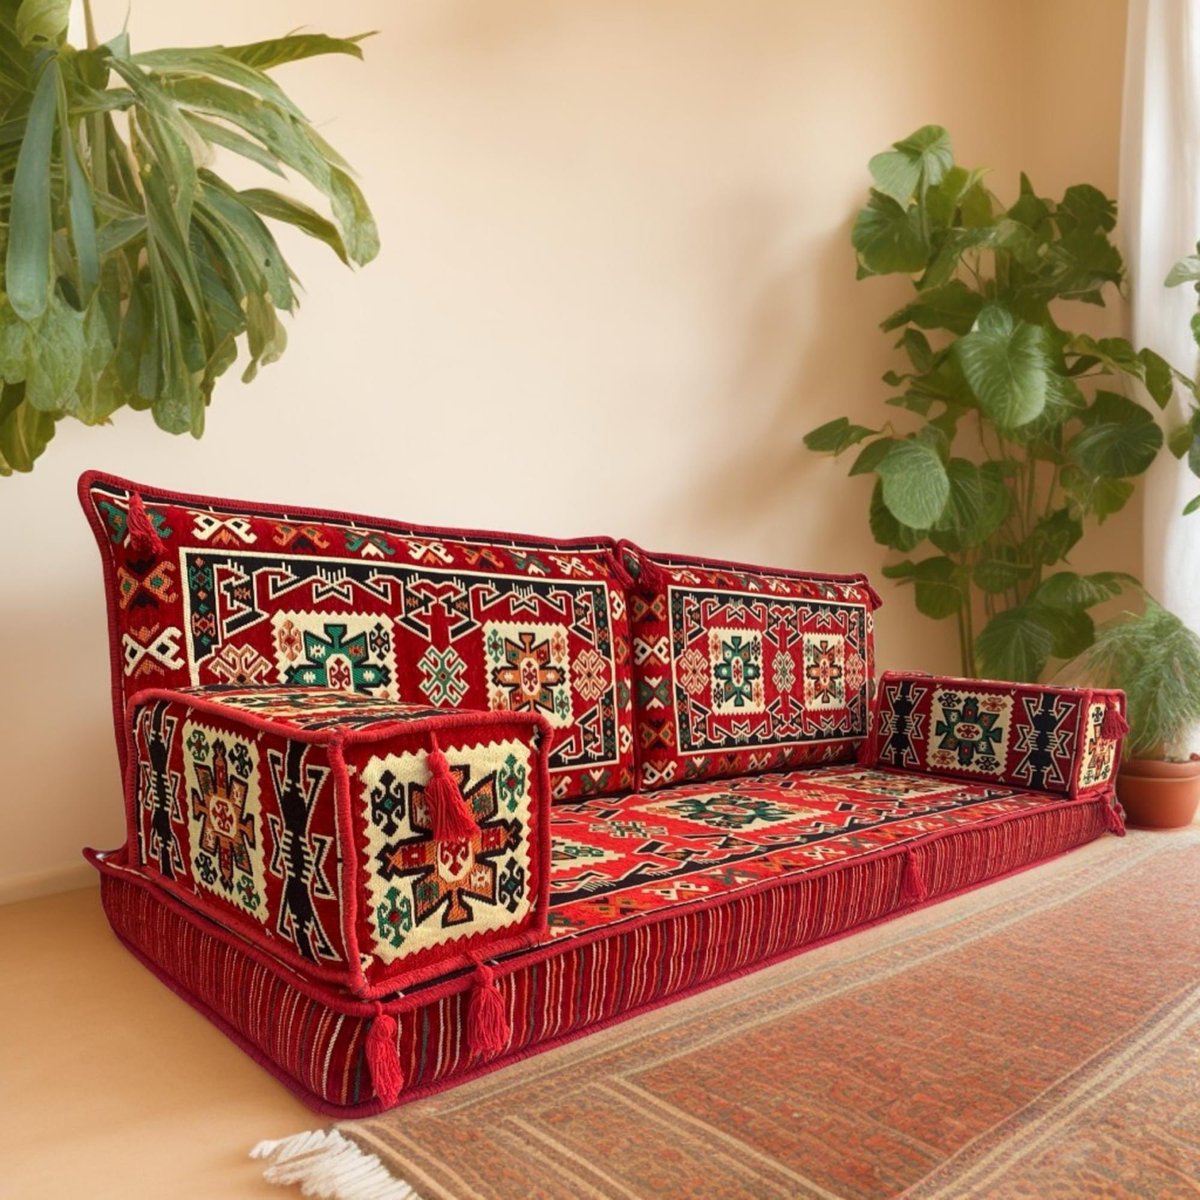 Elevate your home decor with Spirit Home Interiors. Order online now at spirithomeinteriors.com/home/110-perga… and infuse your living space with warmth and luxury!
#MiddleEasternStyle #MoroccanInspired #BohemianChic #FarmhouseDecor #ArabicMajlis #FloorCushion #HandmadeFurniture #VersatileDesign